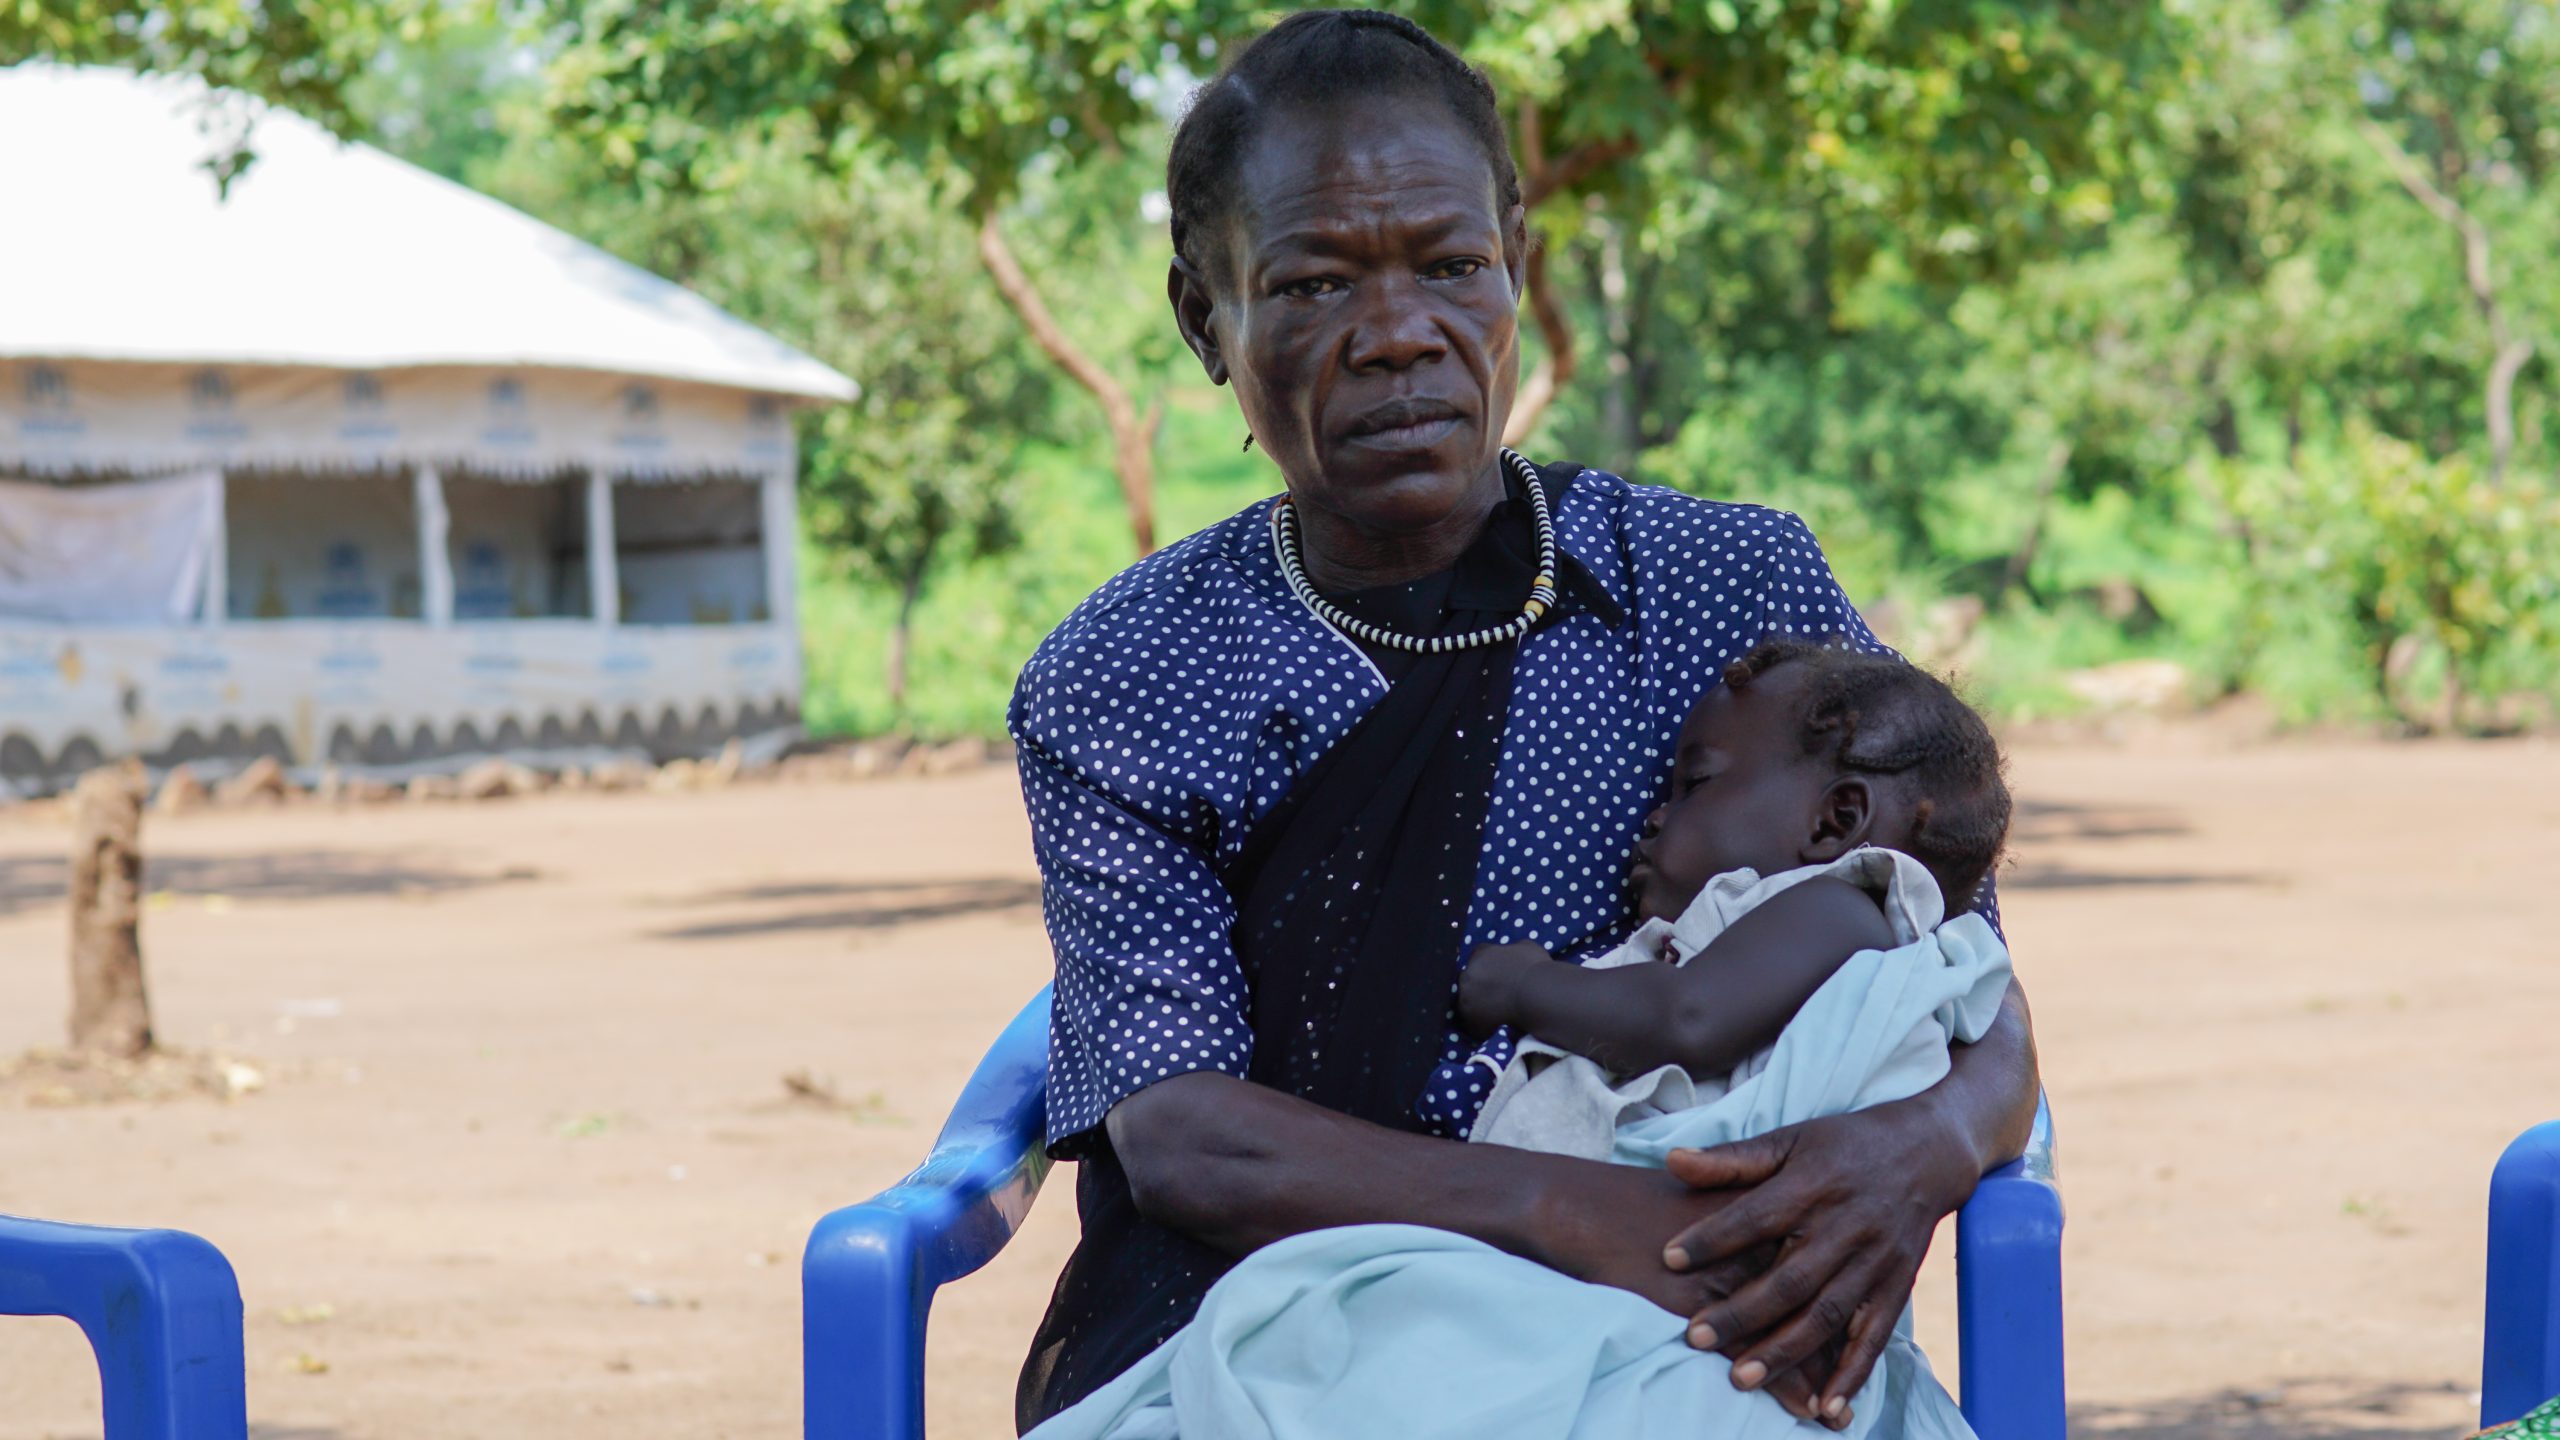 Mariam along with her pregnant daughter and her three children managed to escape the conflict in South Sudan in august 2016. They found refuge at the Bidibidi Refugee Camp in Uganda. Mariam’s daughter pass away shortly after having given birth to her fourth child.